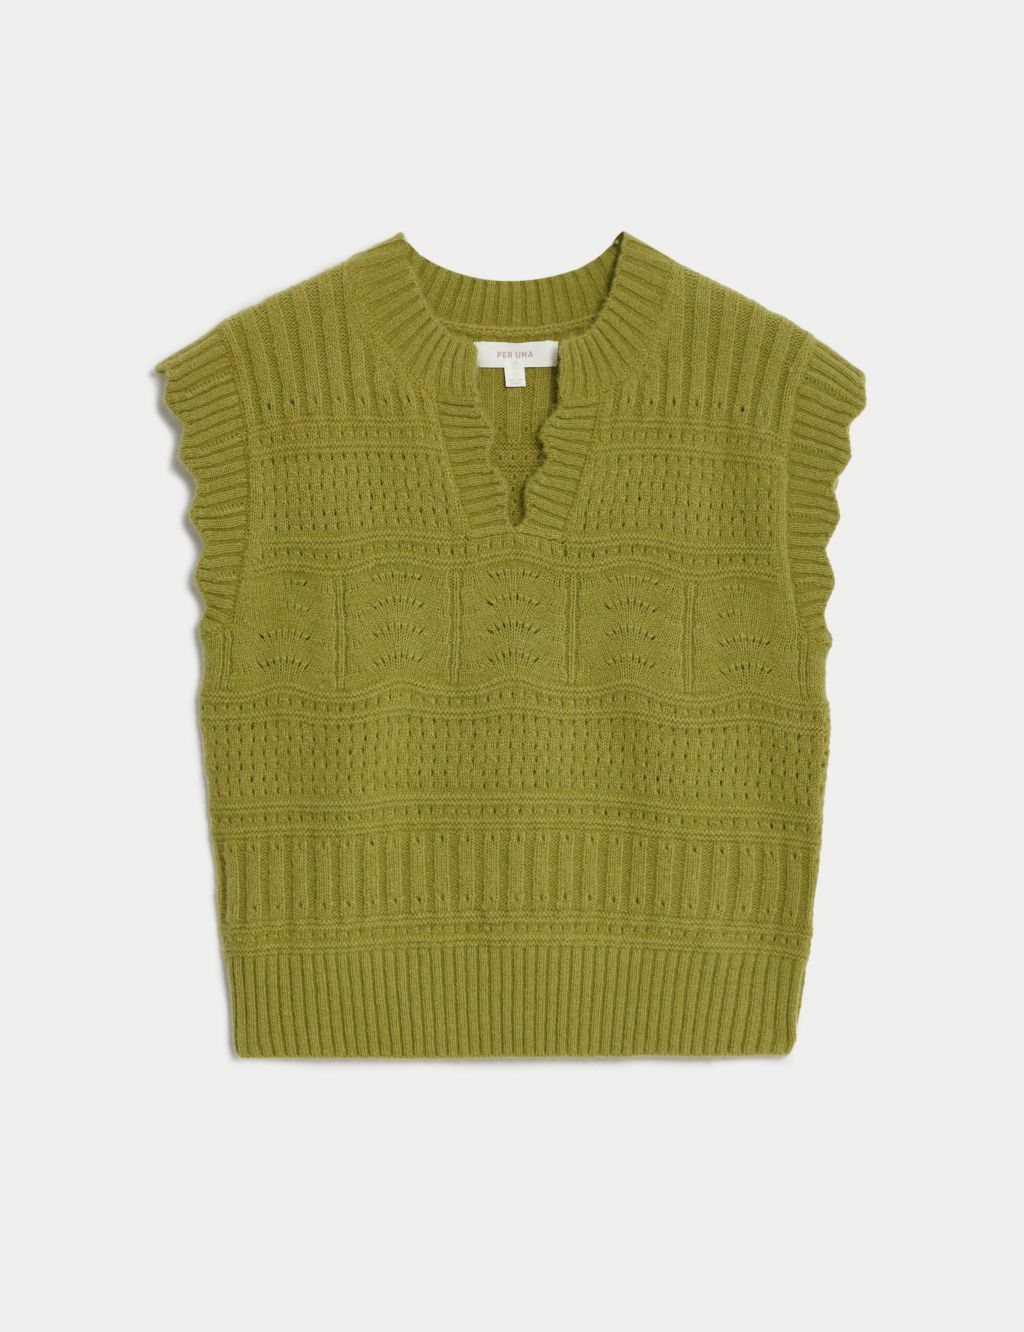 Notch Neck Knitted Vest with Wool image 2